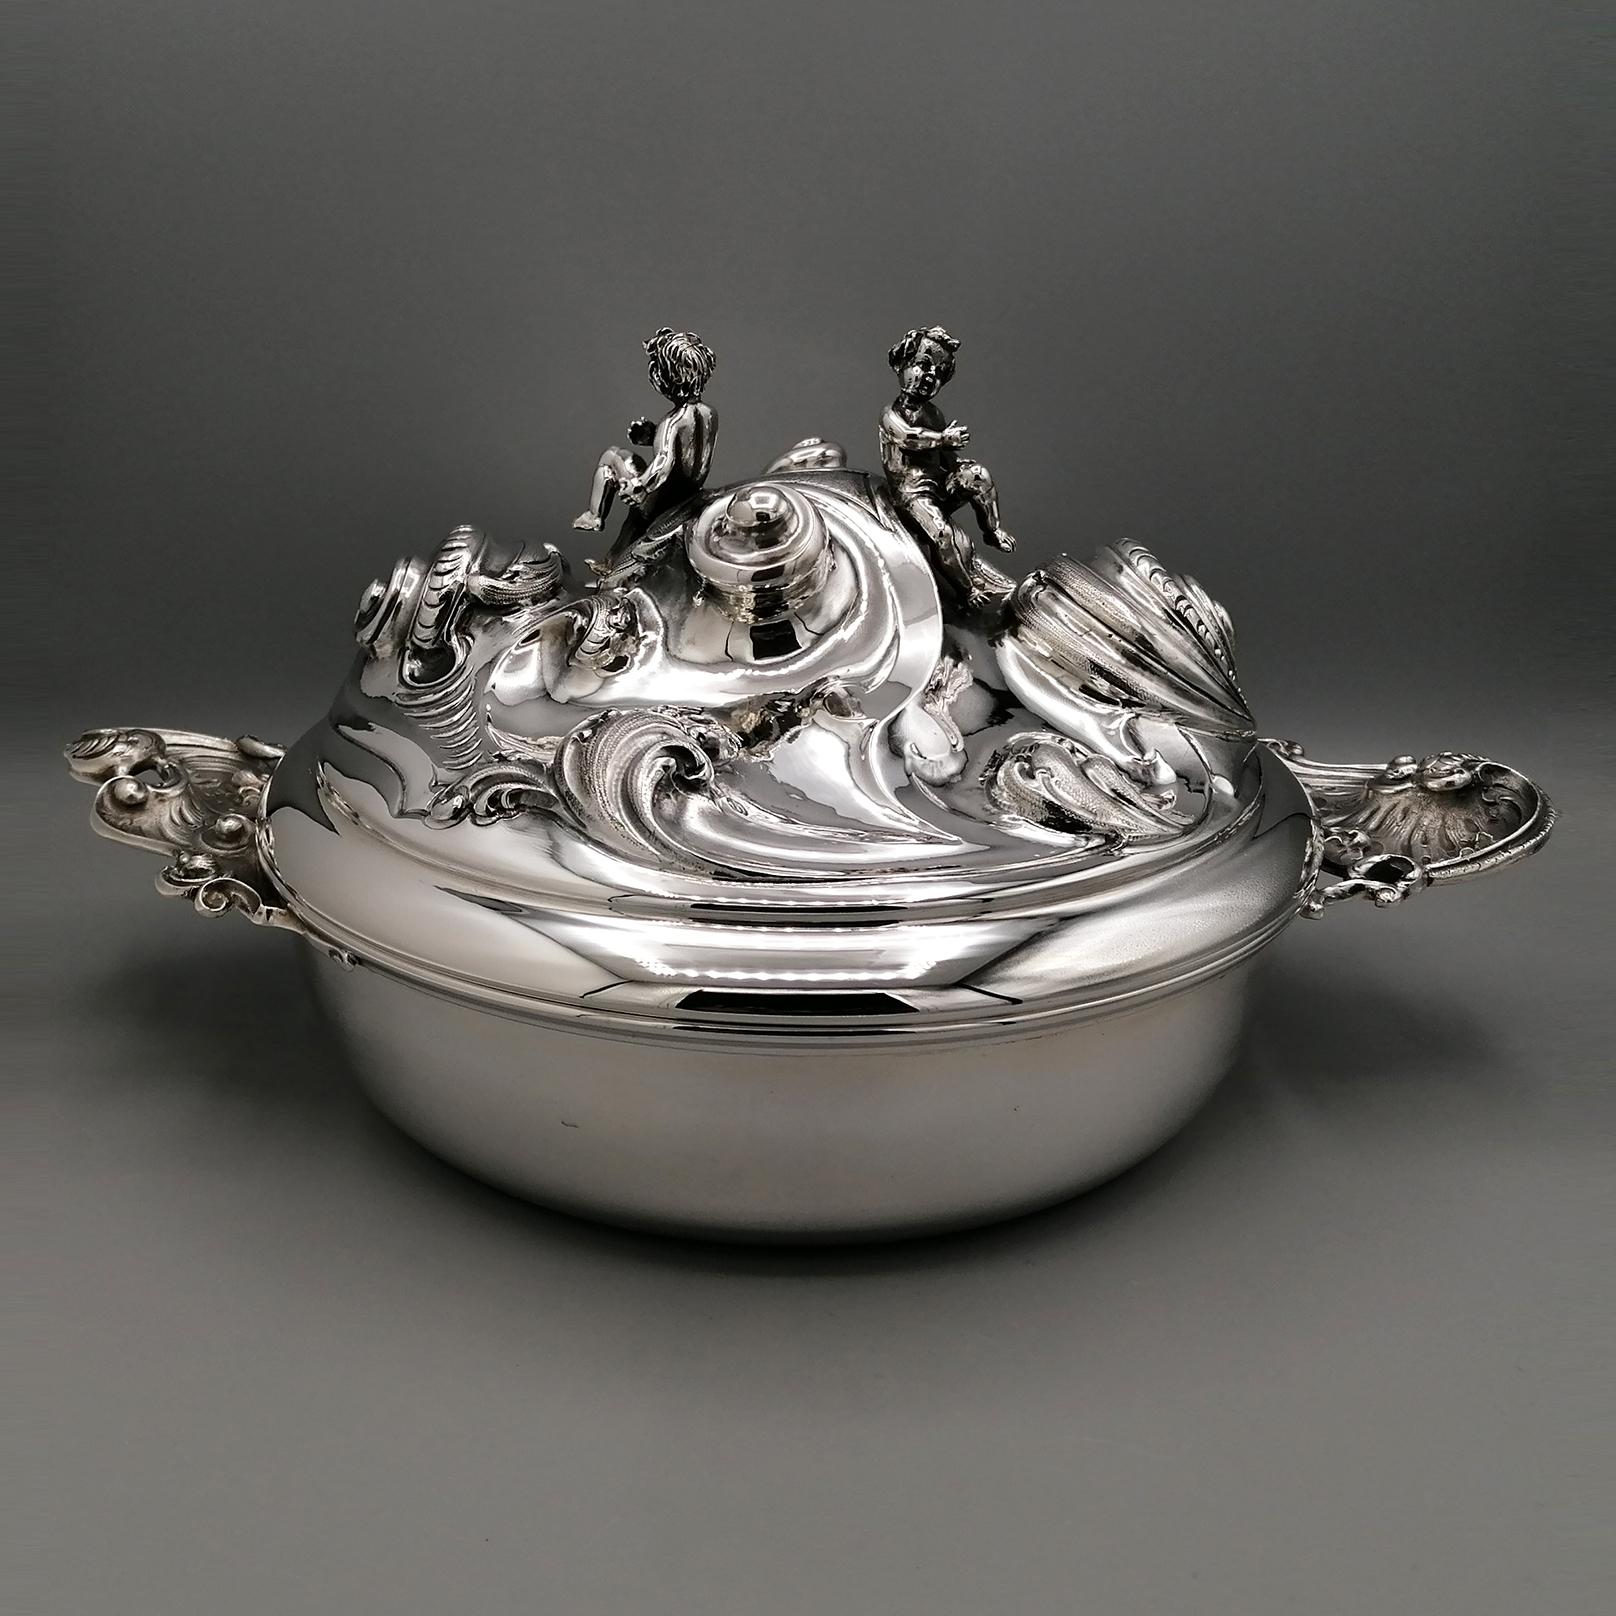 Vegetable dish  in solid silver in baroque style.
The bottom of the vegetable bowl is solid and smooth.
Two handles made with the casting technique and subsequently chiselled, with a design of waves and scrolls, are welded to the sides.
The lid has